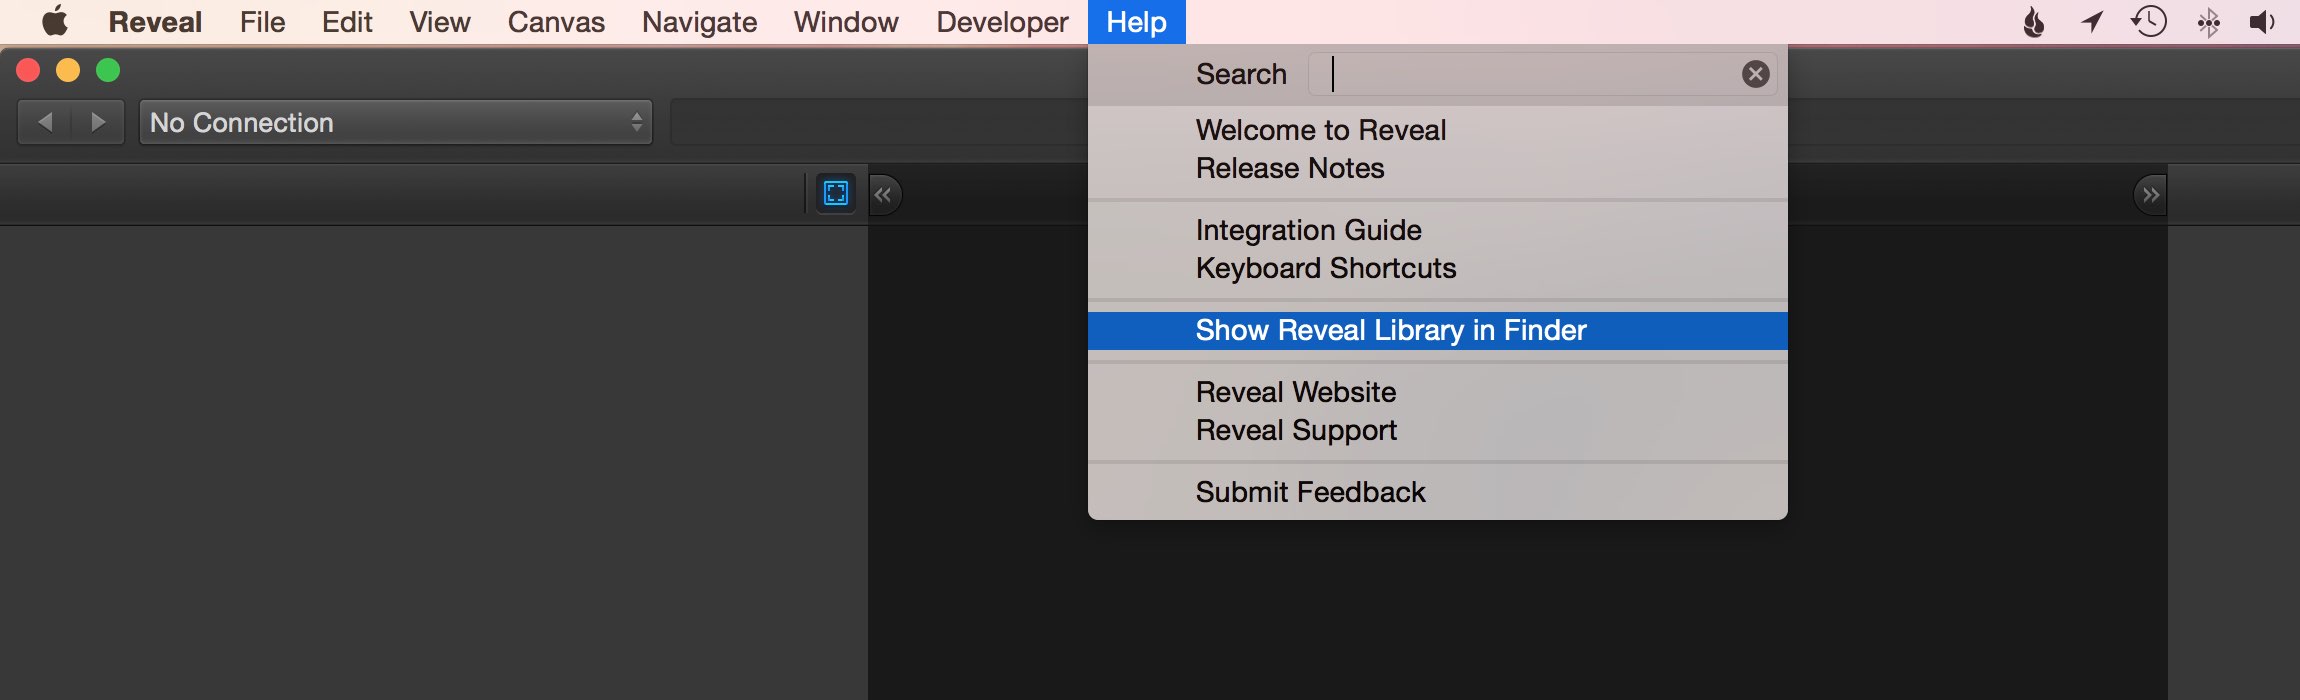 show-reveal-library-in-finder.jpg